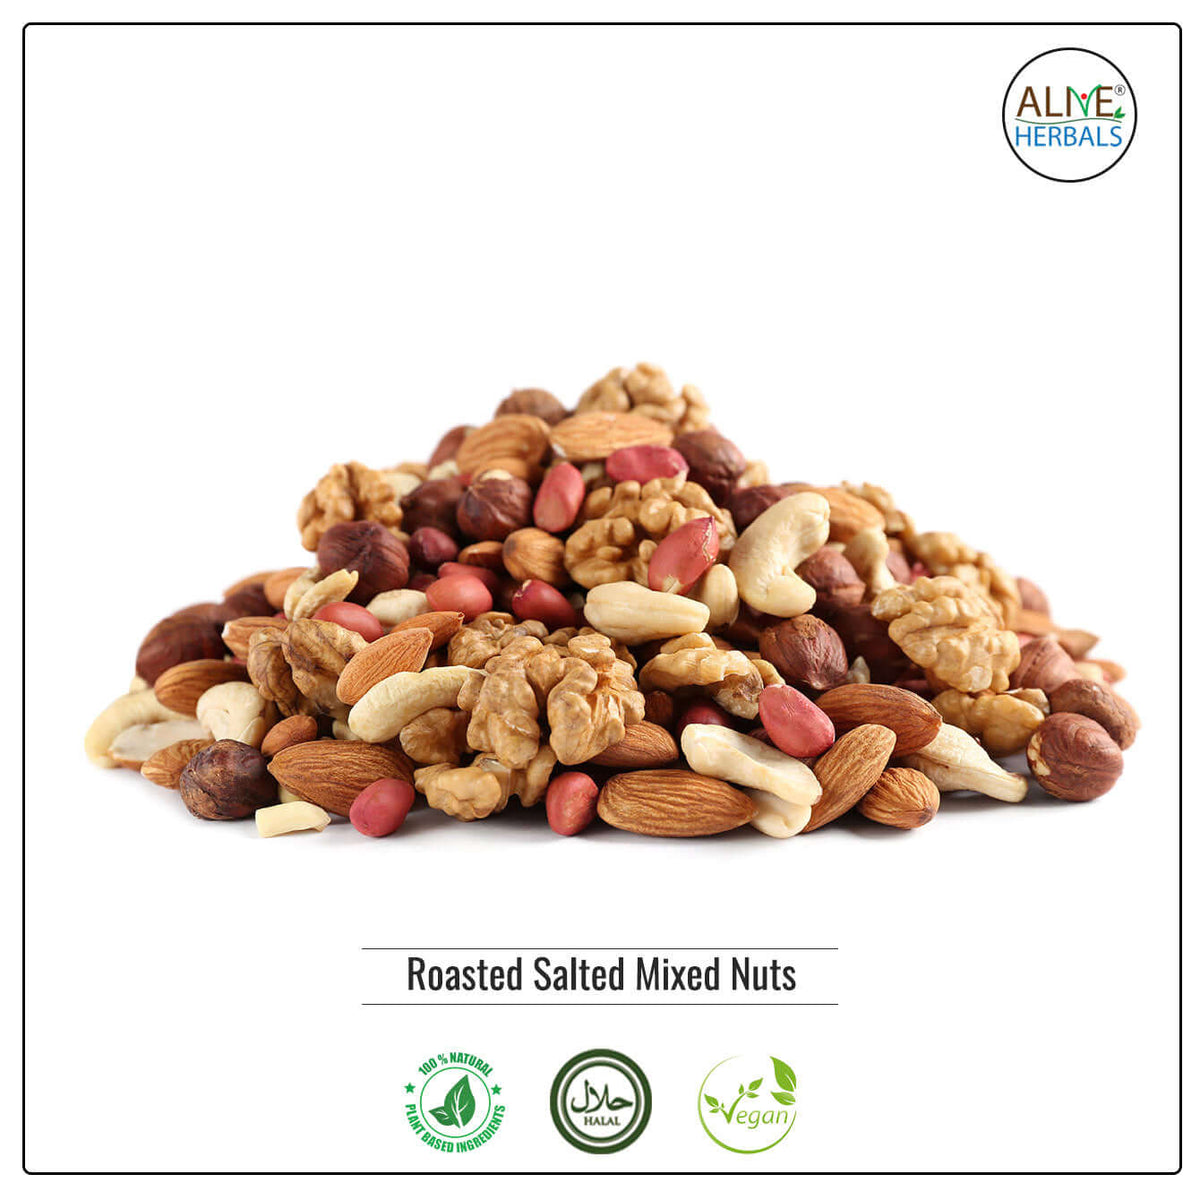 Mix Nuts (Roasted Salted) - Buy at Natural Food Store | Alive Herbals.